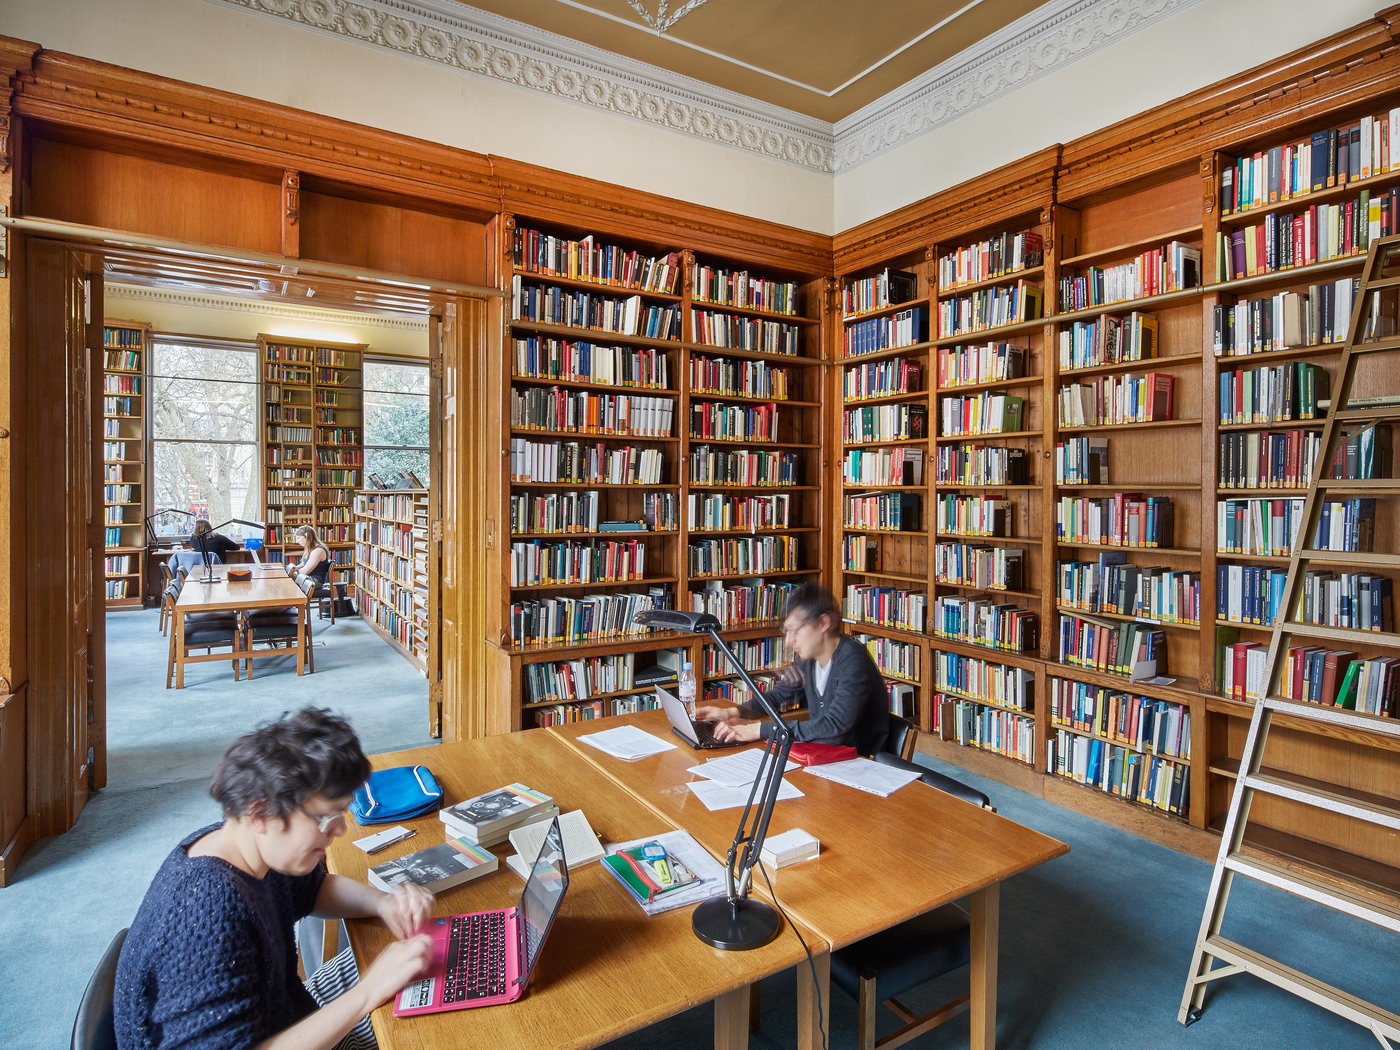 Two readers studying in one of the first floor reading rooms, with bookshelves and a ladder in the background